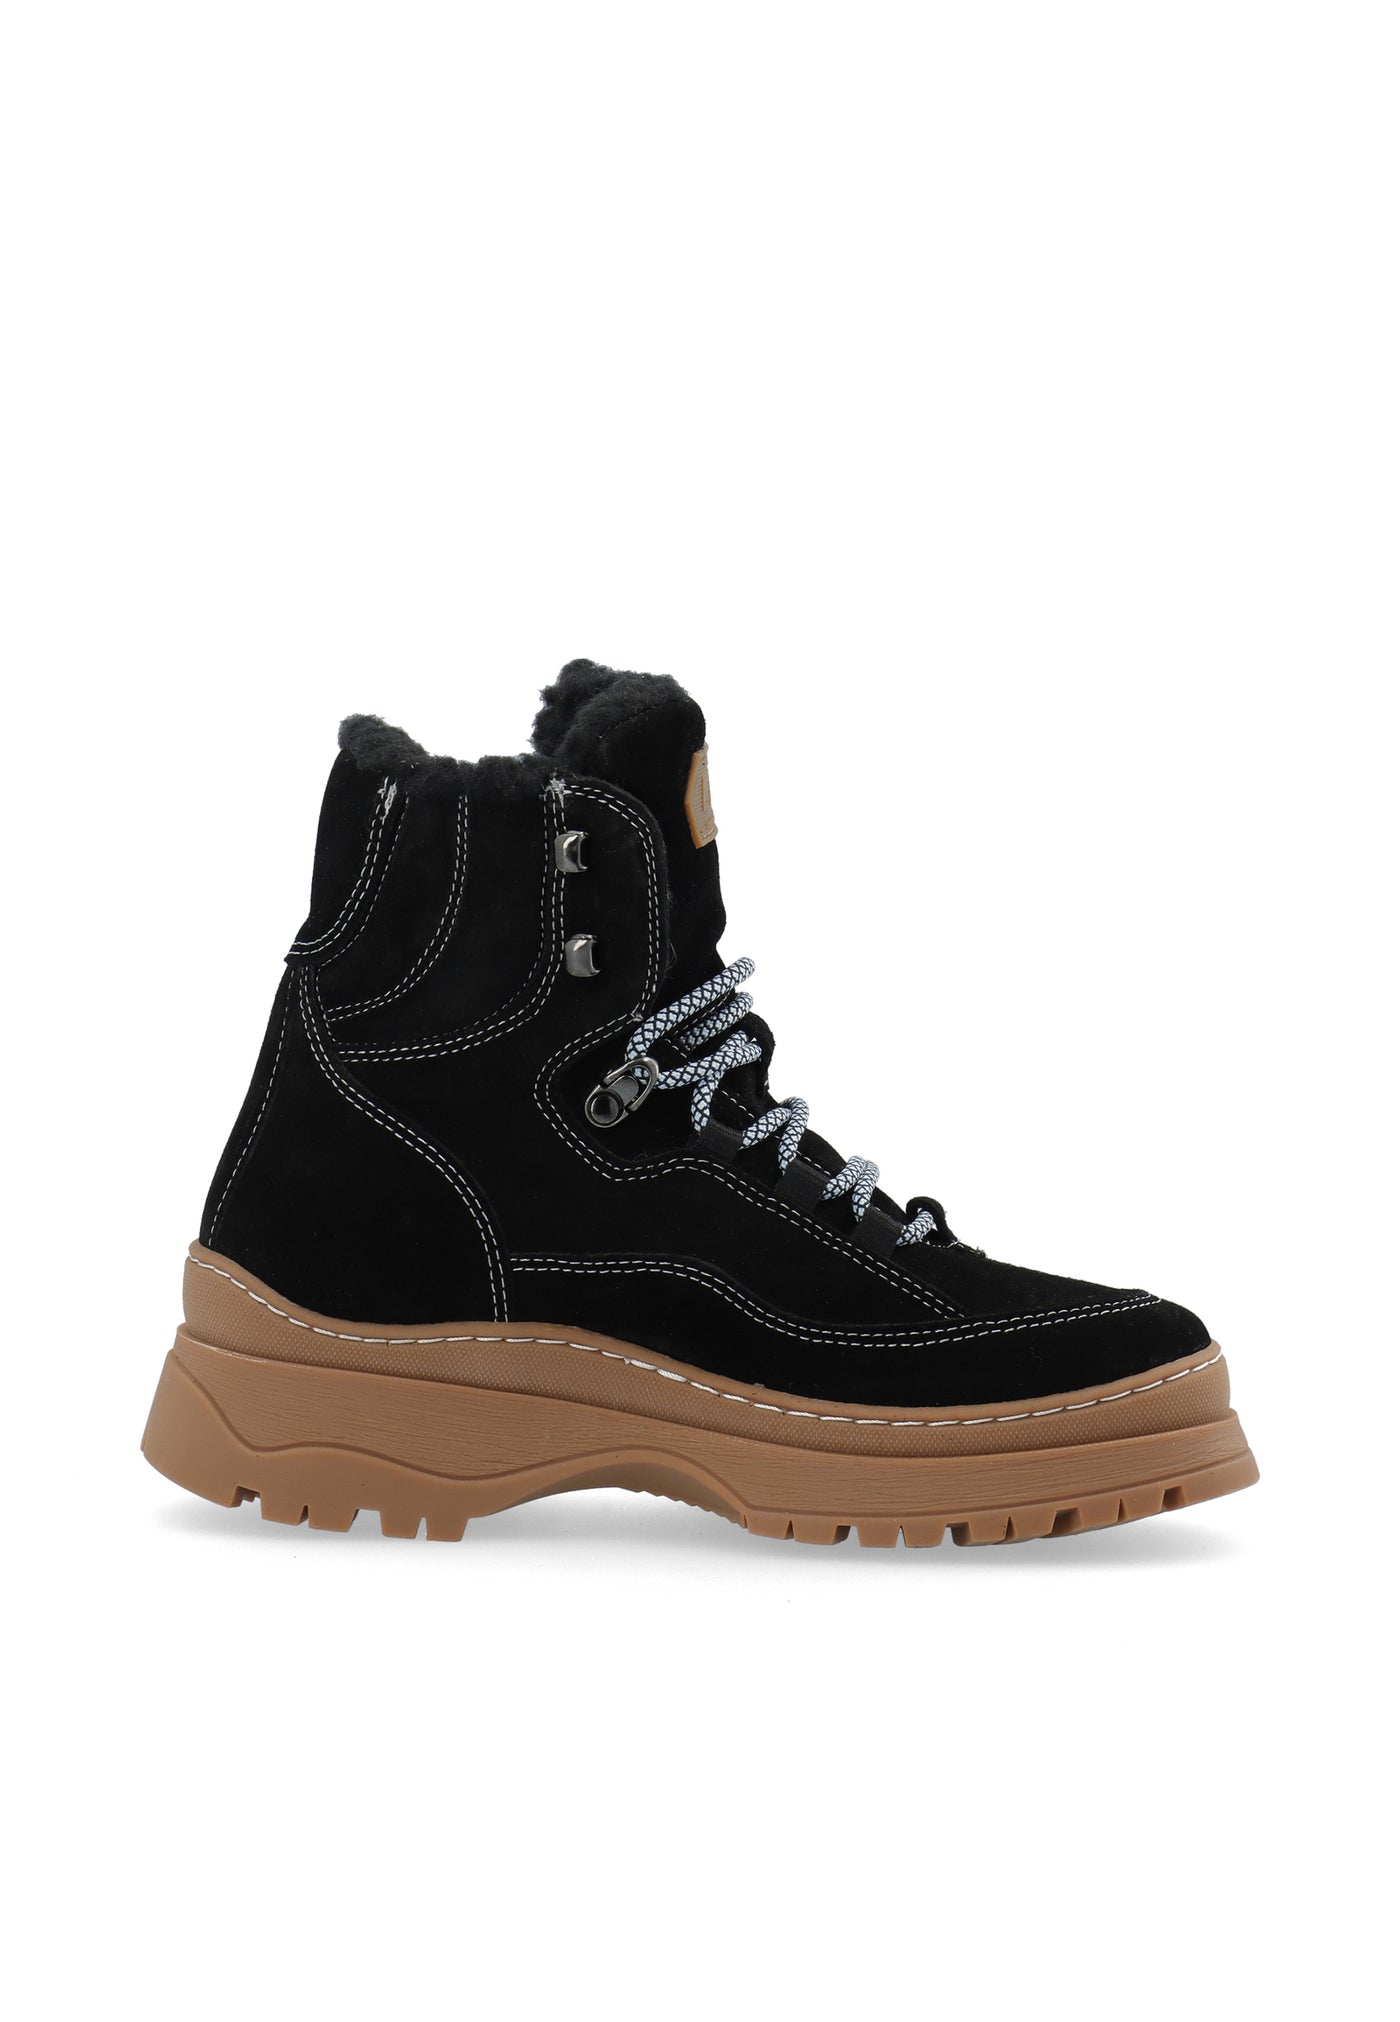 LÄST Downhill - Leather/Suede - Black, Warm Lining Ankle Boots Black